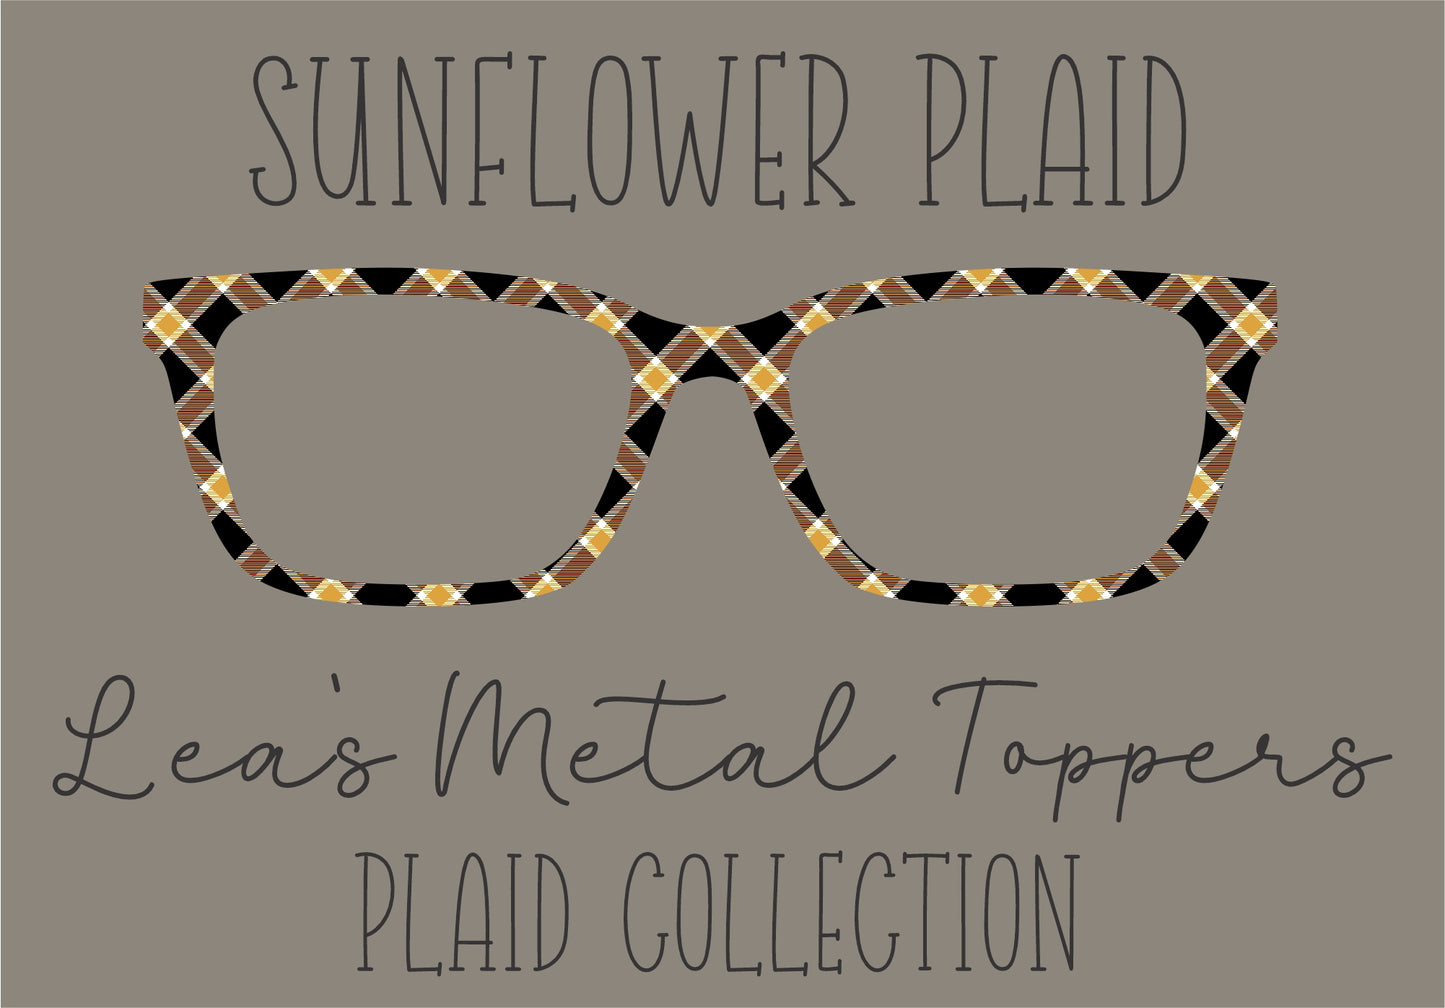 SUNFLOWER PLAID Eyewear Frame Toppers COMES WITH MAGNETS